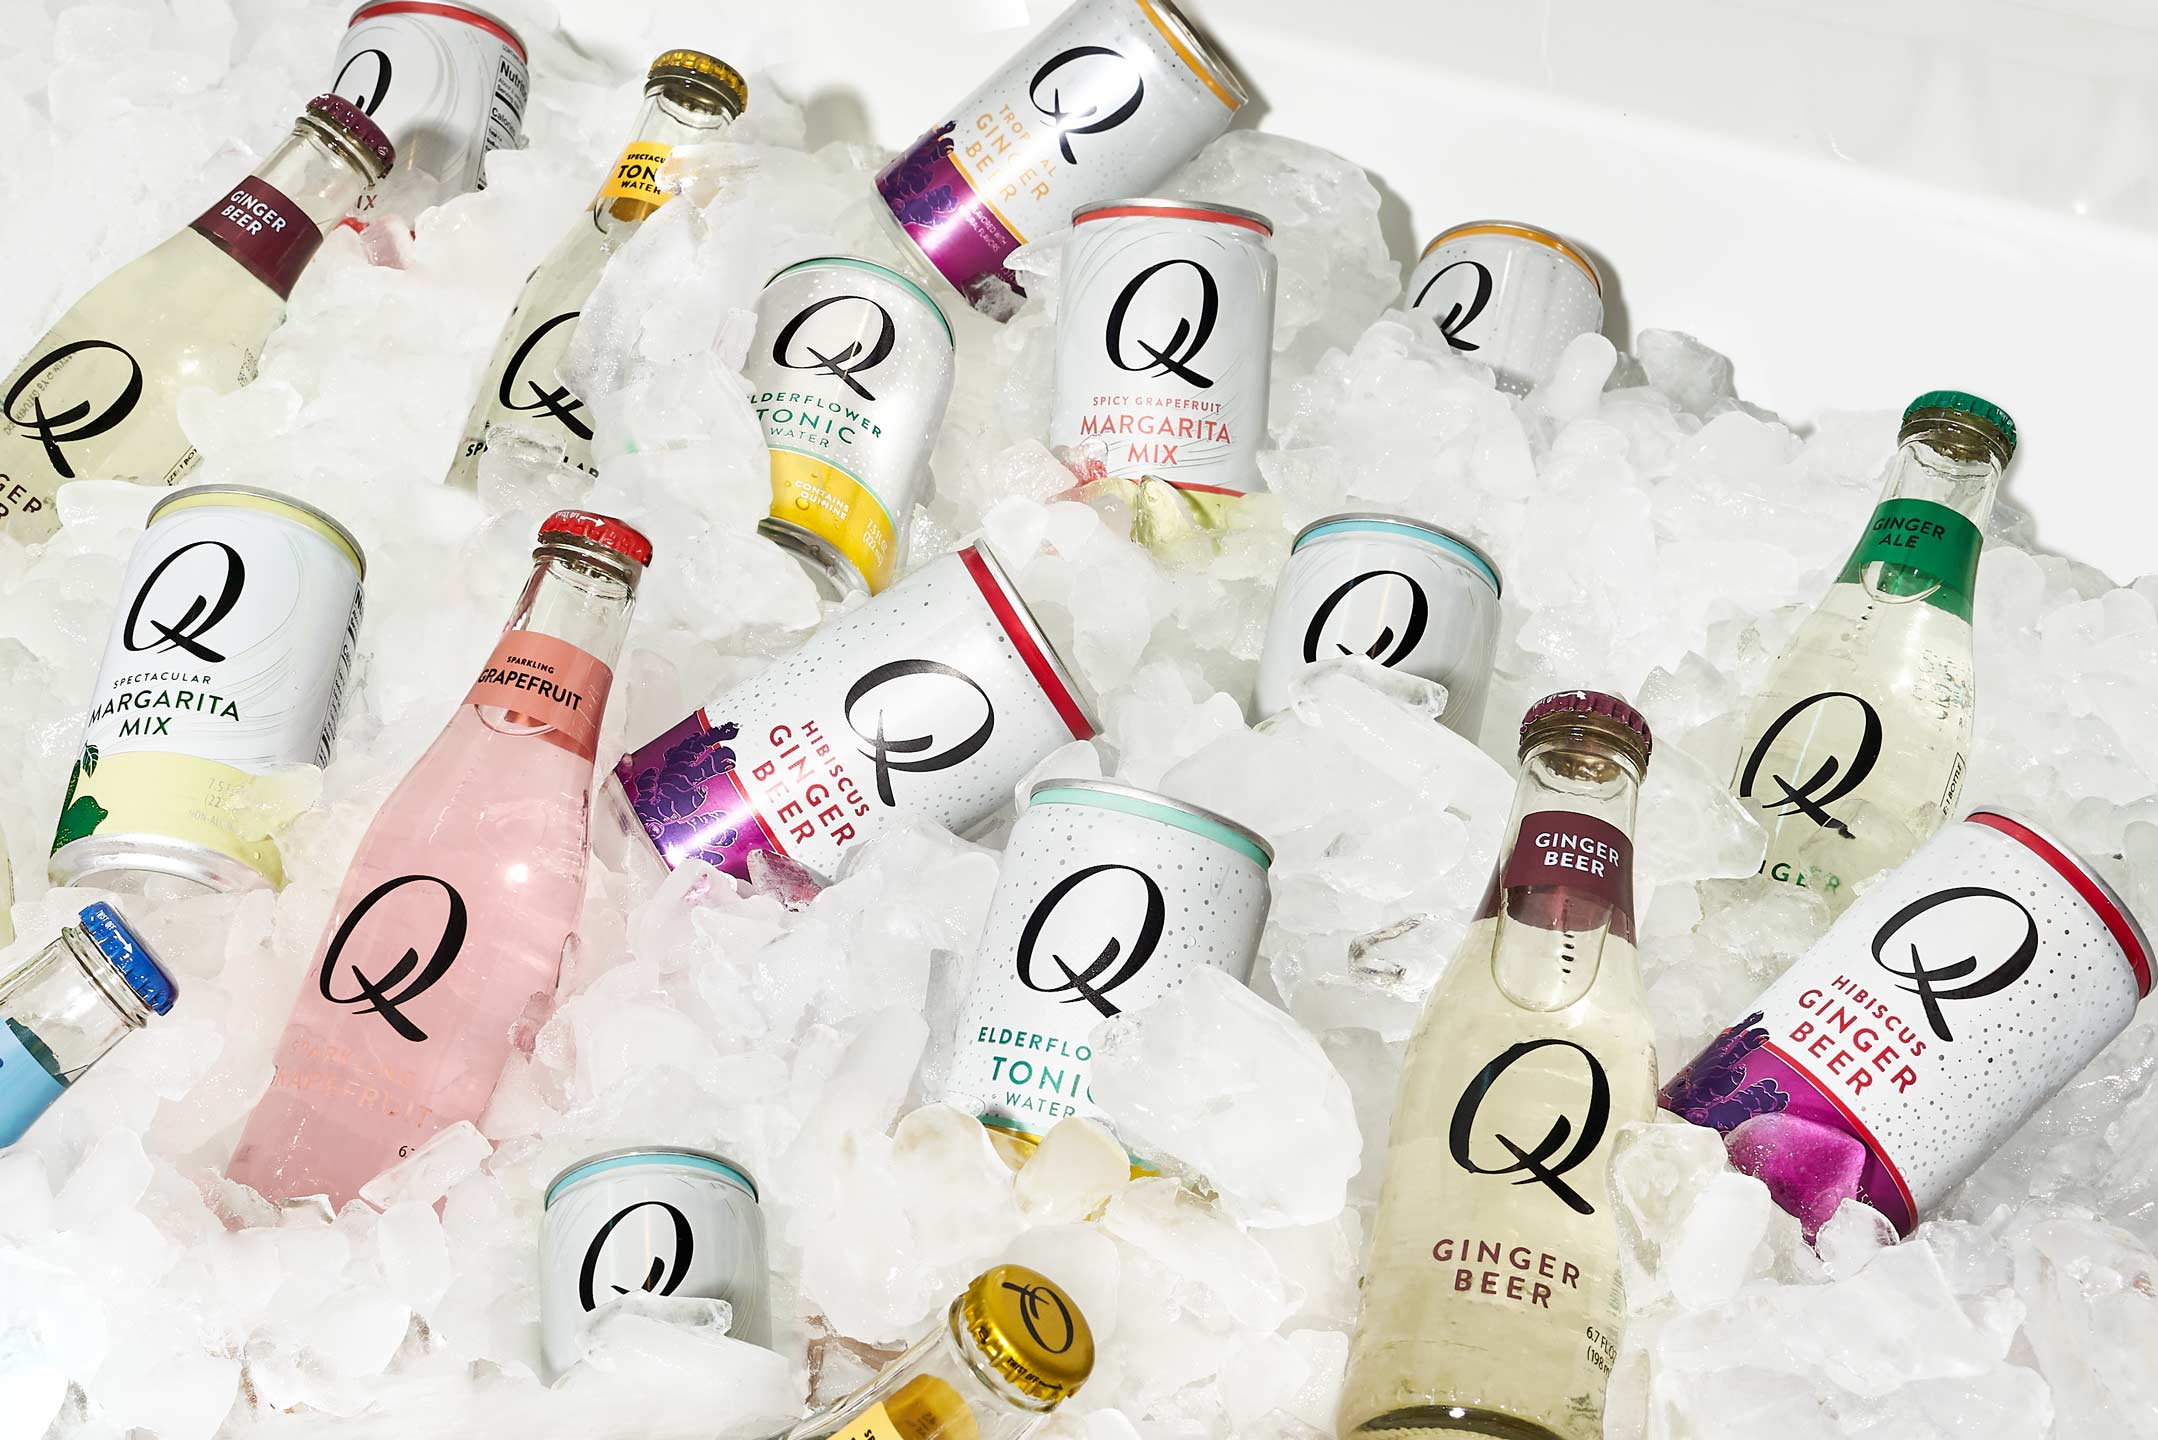 Q Mixers bottles and cans in an ice-filled bathtub.